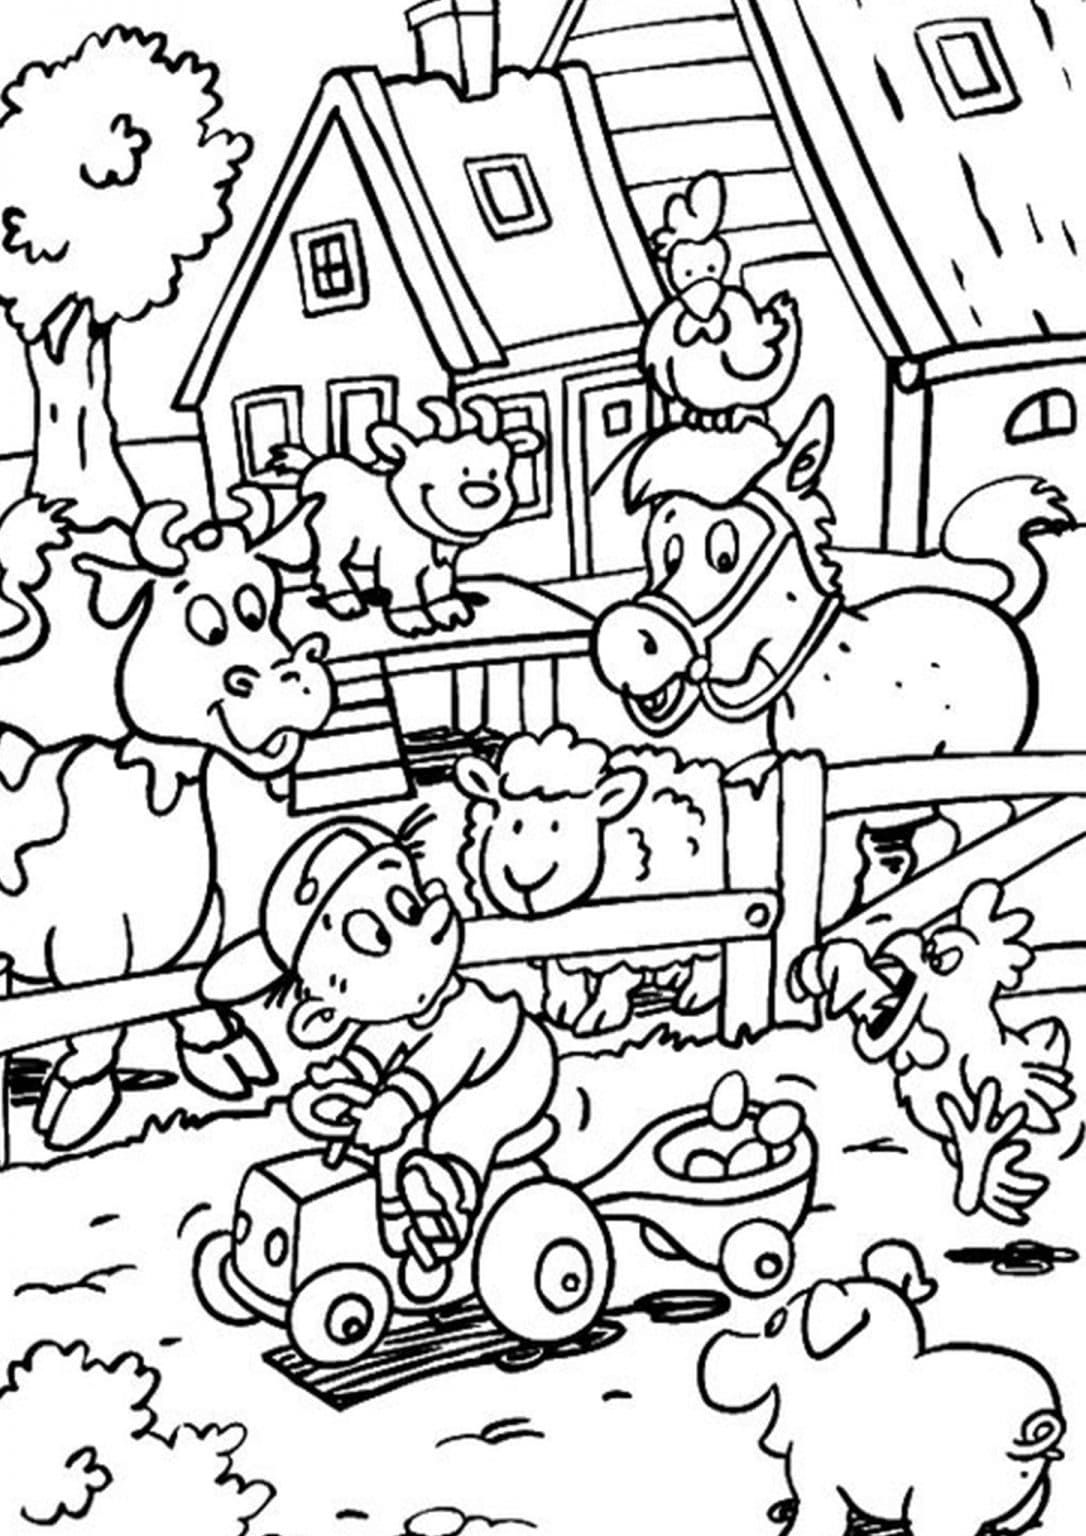 Free & Easy To Print Farm Coloring Pages | Farm coloring pages, Coloring  pages, Farm animal coloring pages